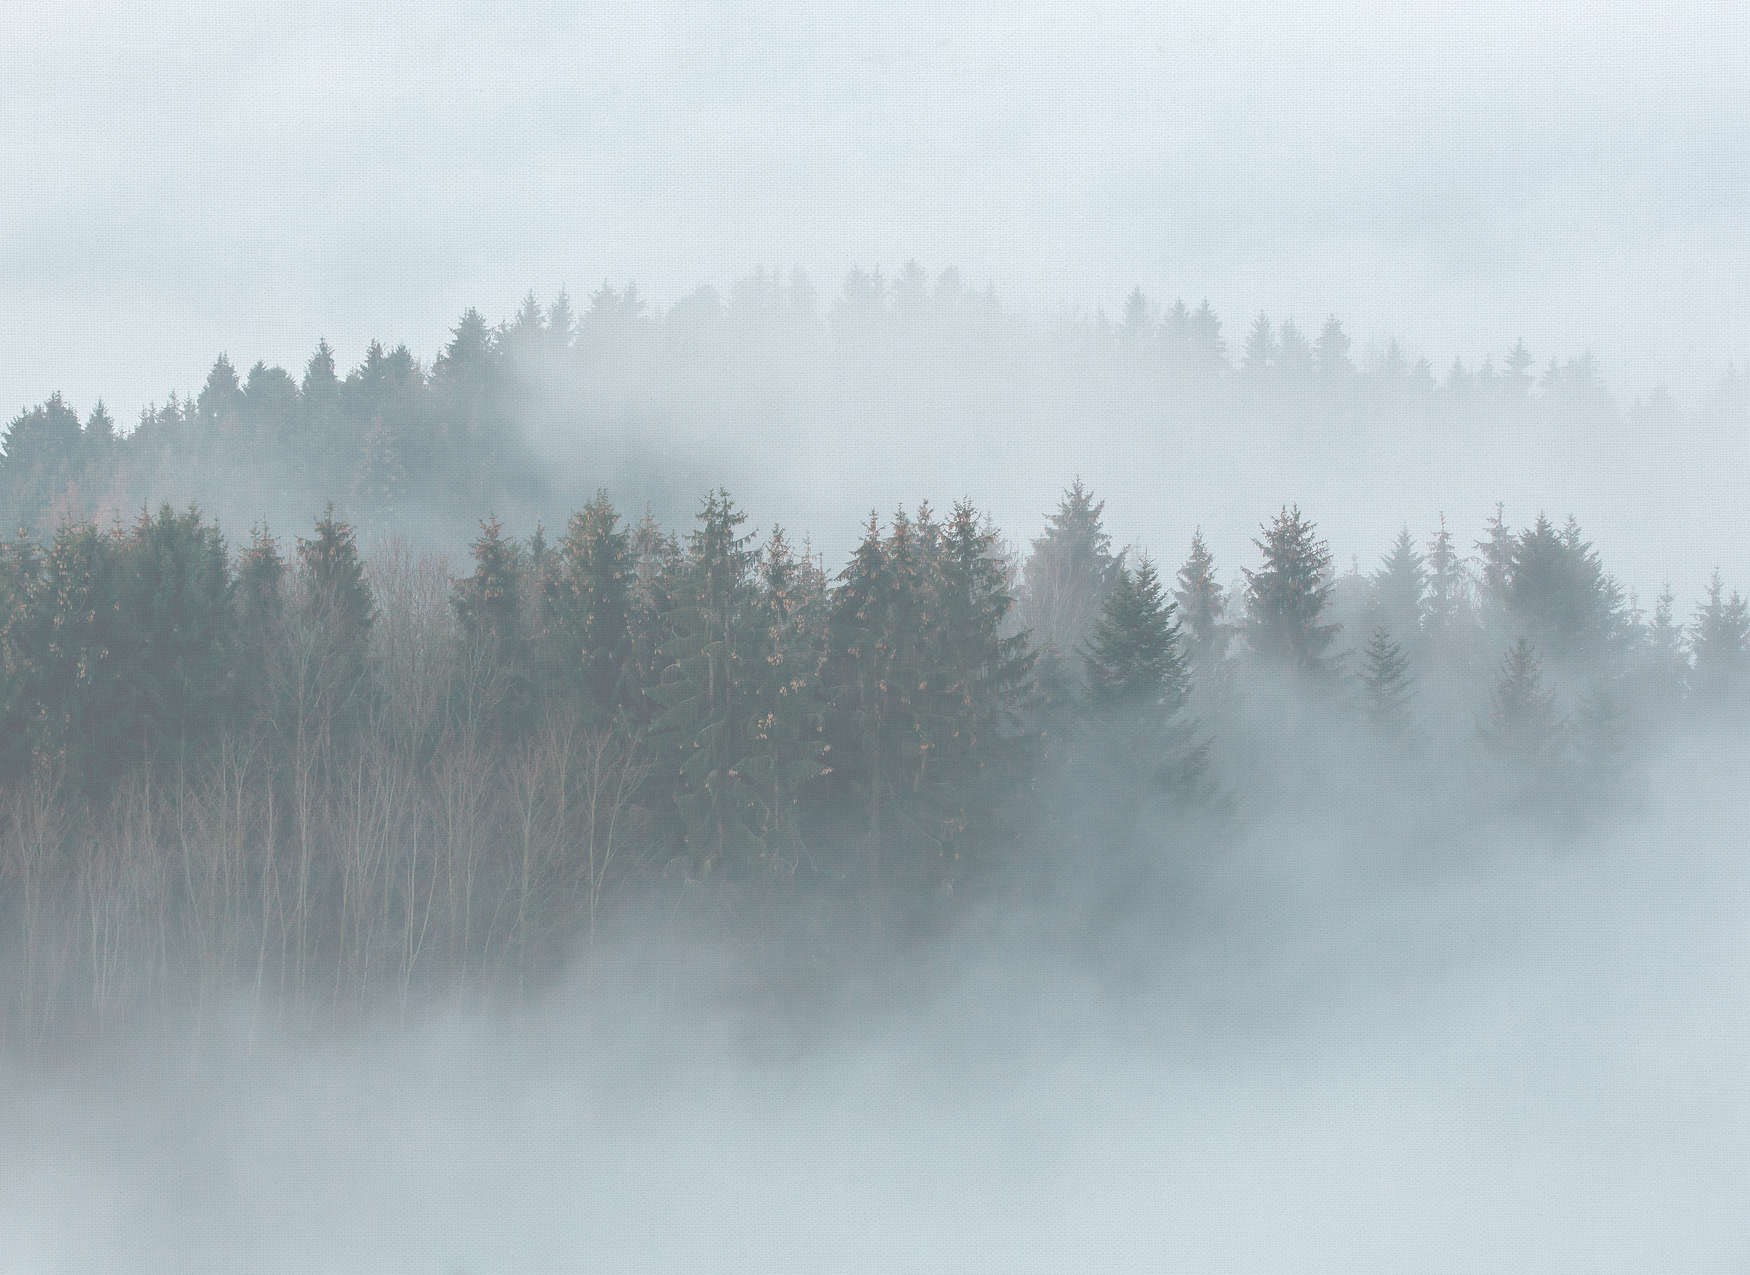             Mysterious forest in the fog - white, green, grey
        